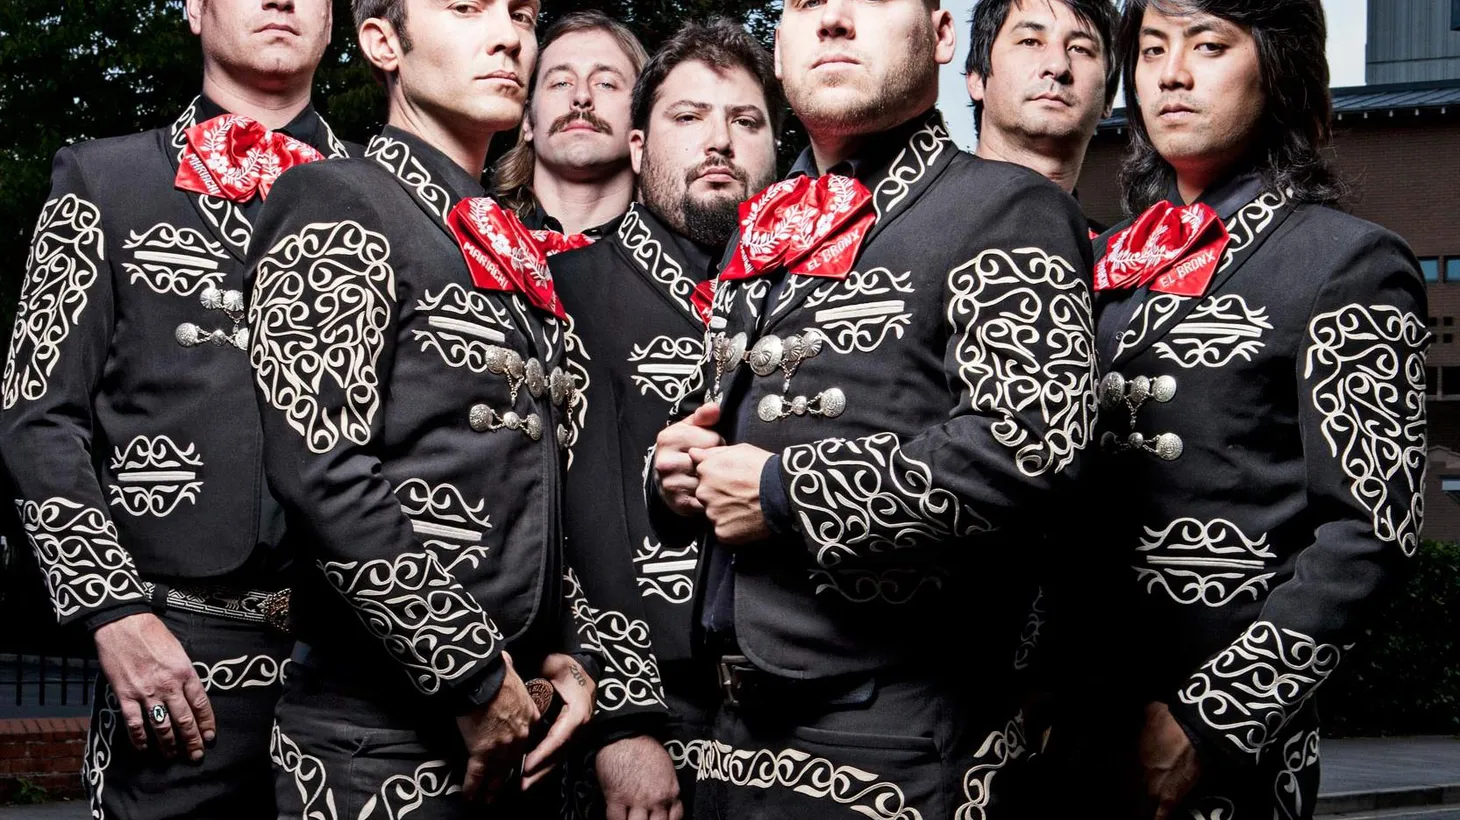 Mariachi El Bronx are sure to knock our socks off at KCRW's Masquerade Ball next weekend but first...